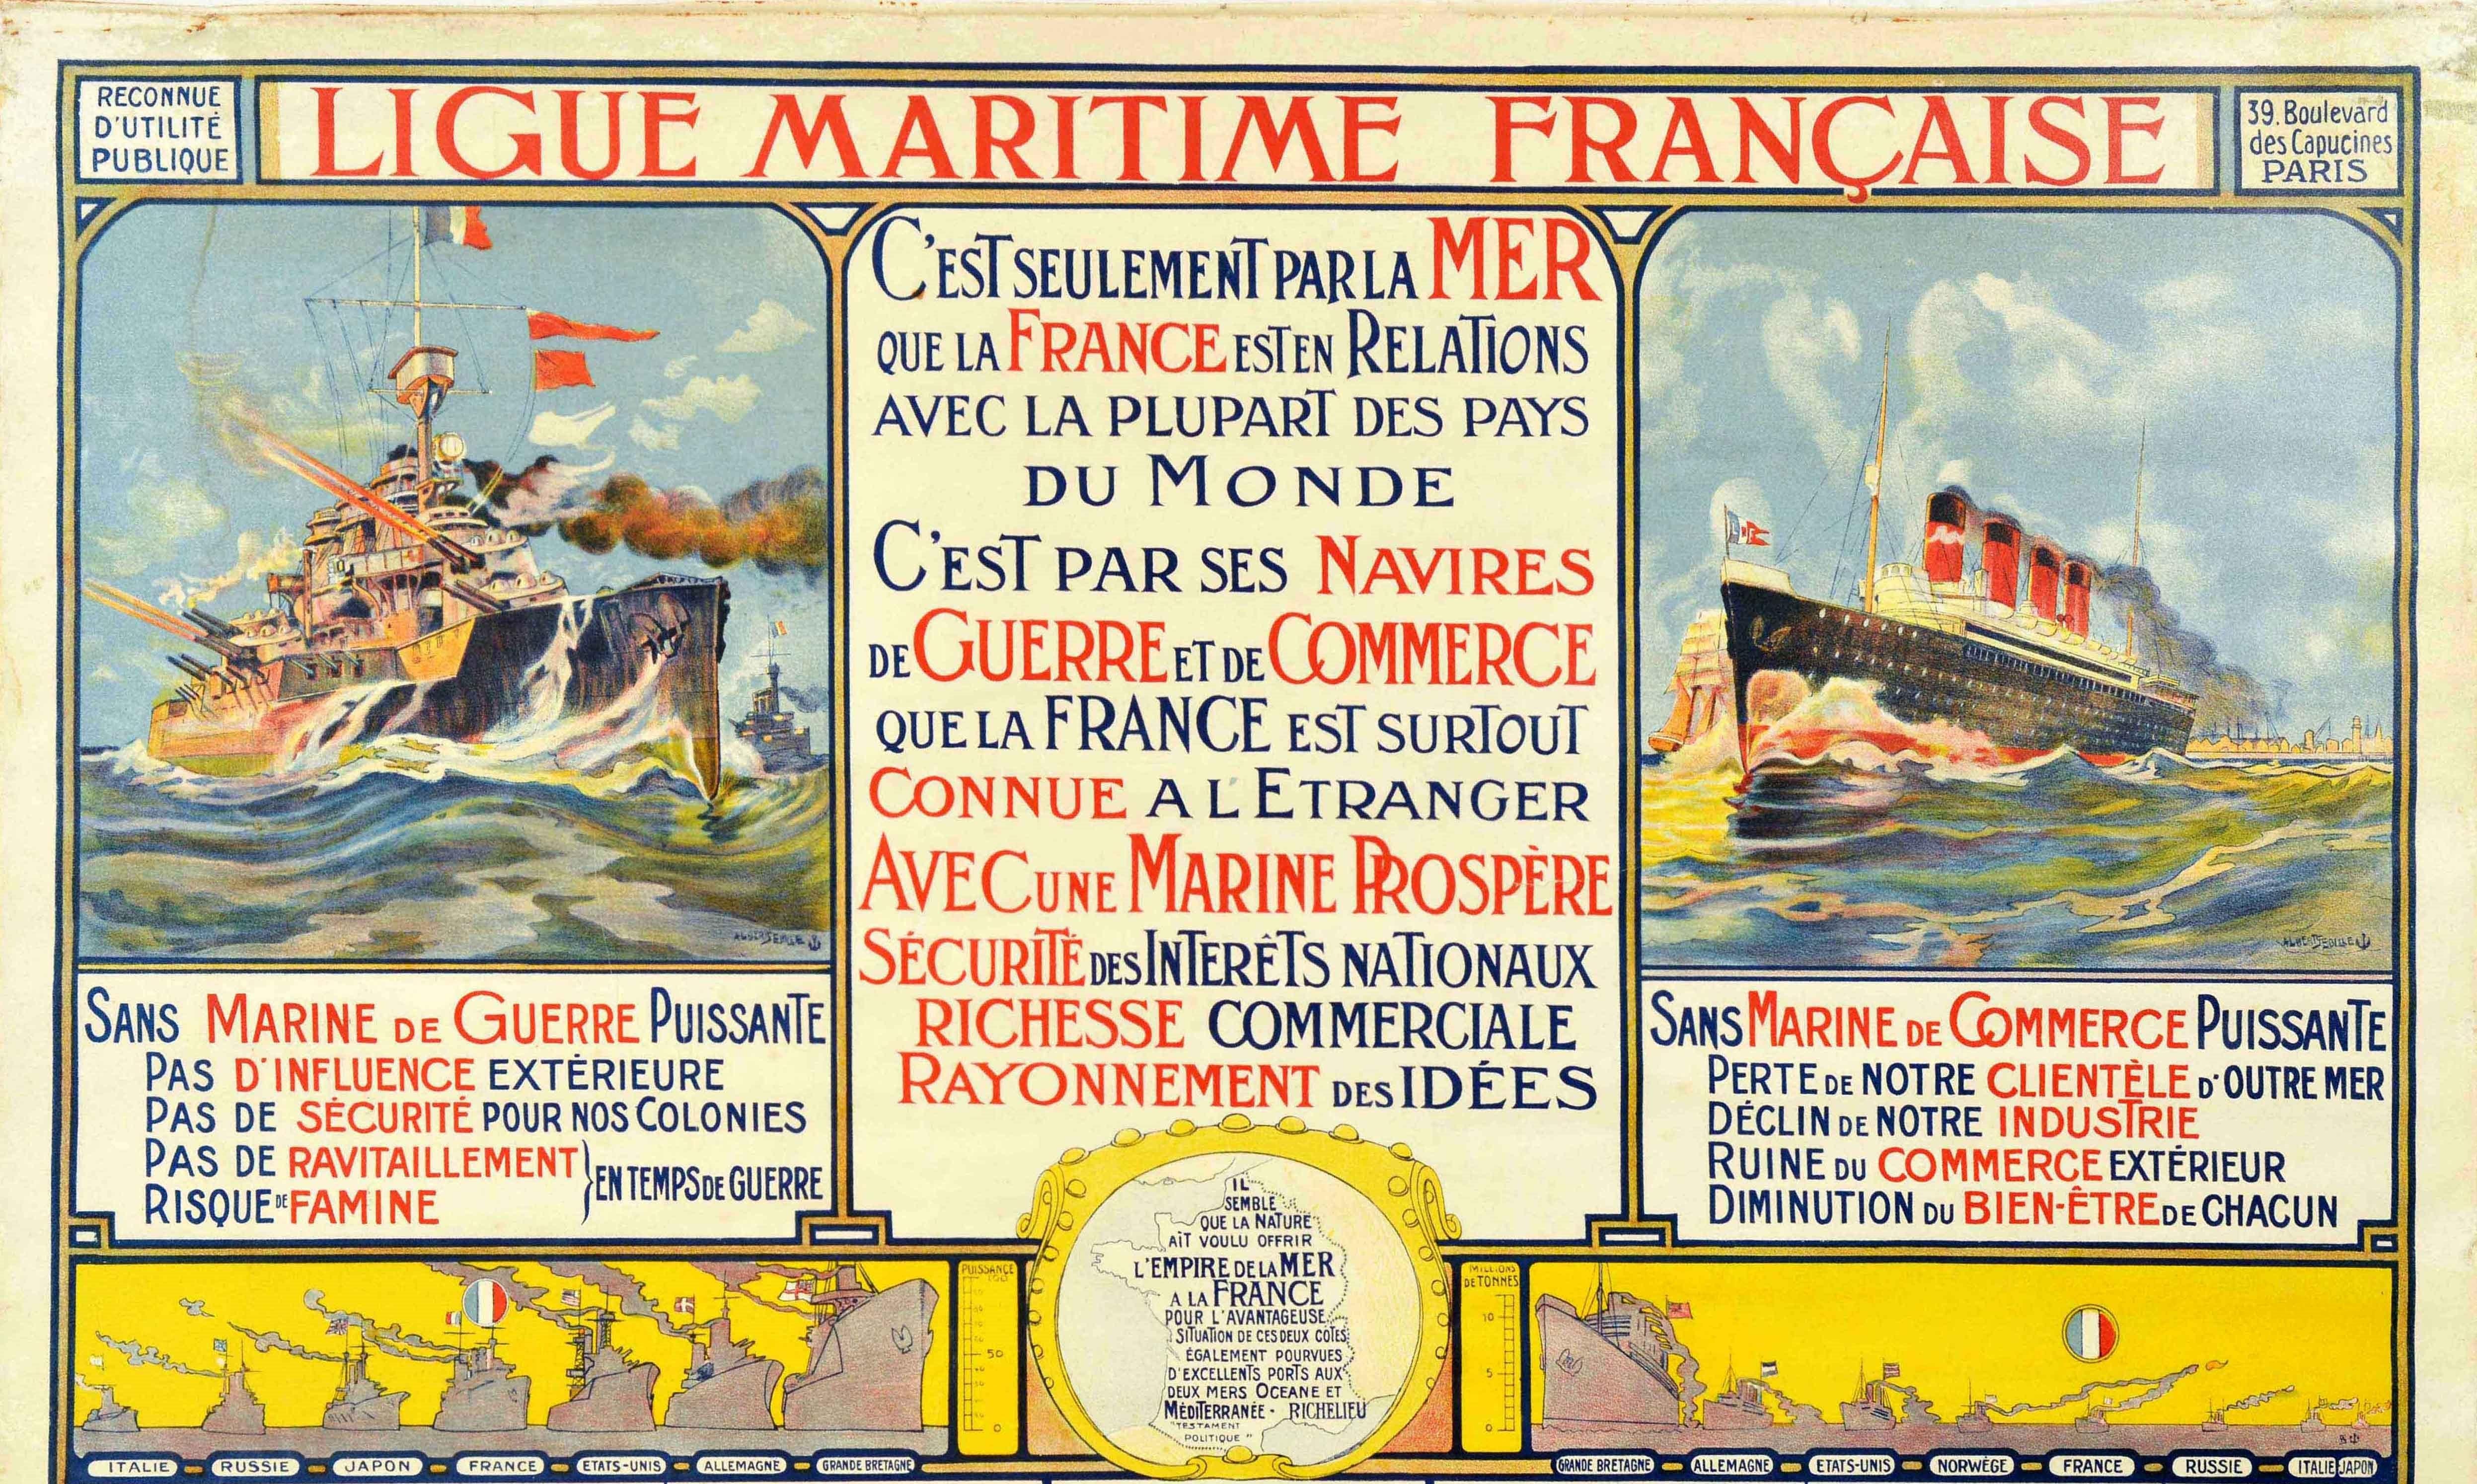 Original antique poster for the Ligue Maritime Francais / French Maritime League featuring a warship firing guns at sea and an ocean liner cruise ship with the benefits of both listed in the centre - C'est seulement par la mer que la France est en